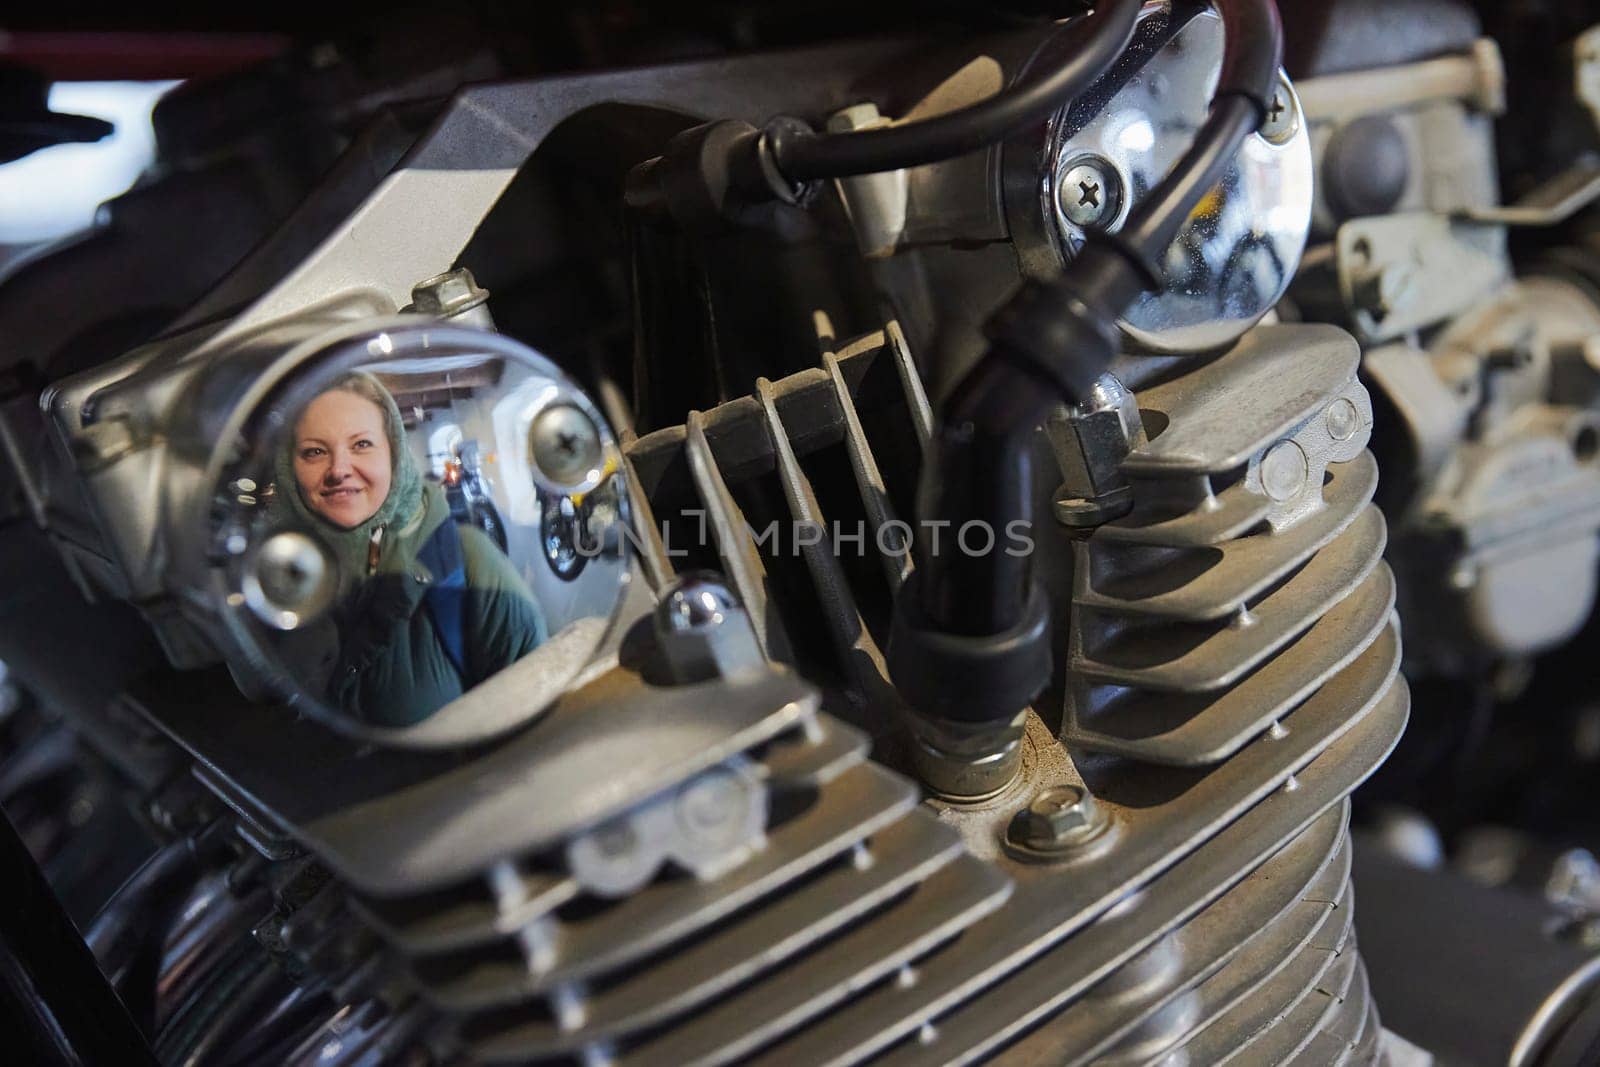 visitor is reflected in the engine of a vintage motorcycle in Denmark by Viktor_Osypenko